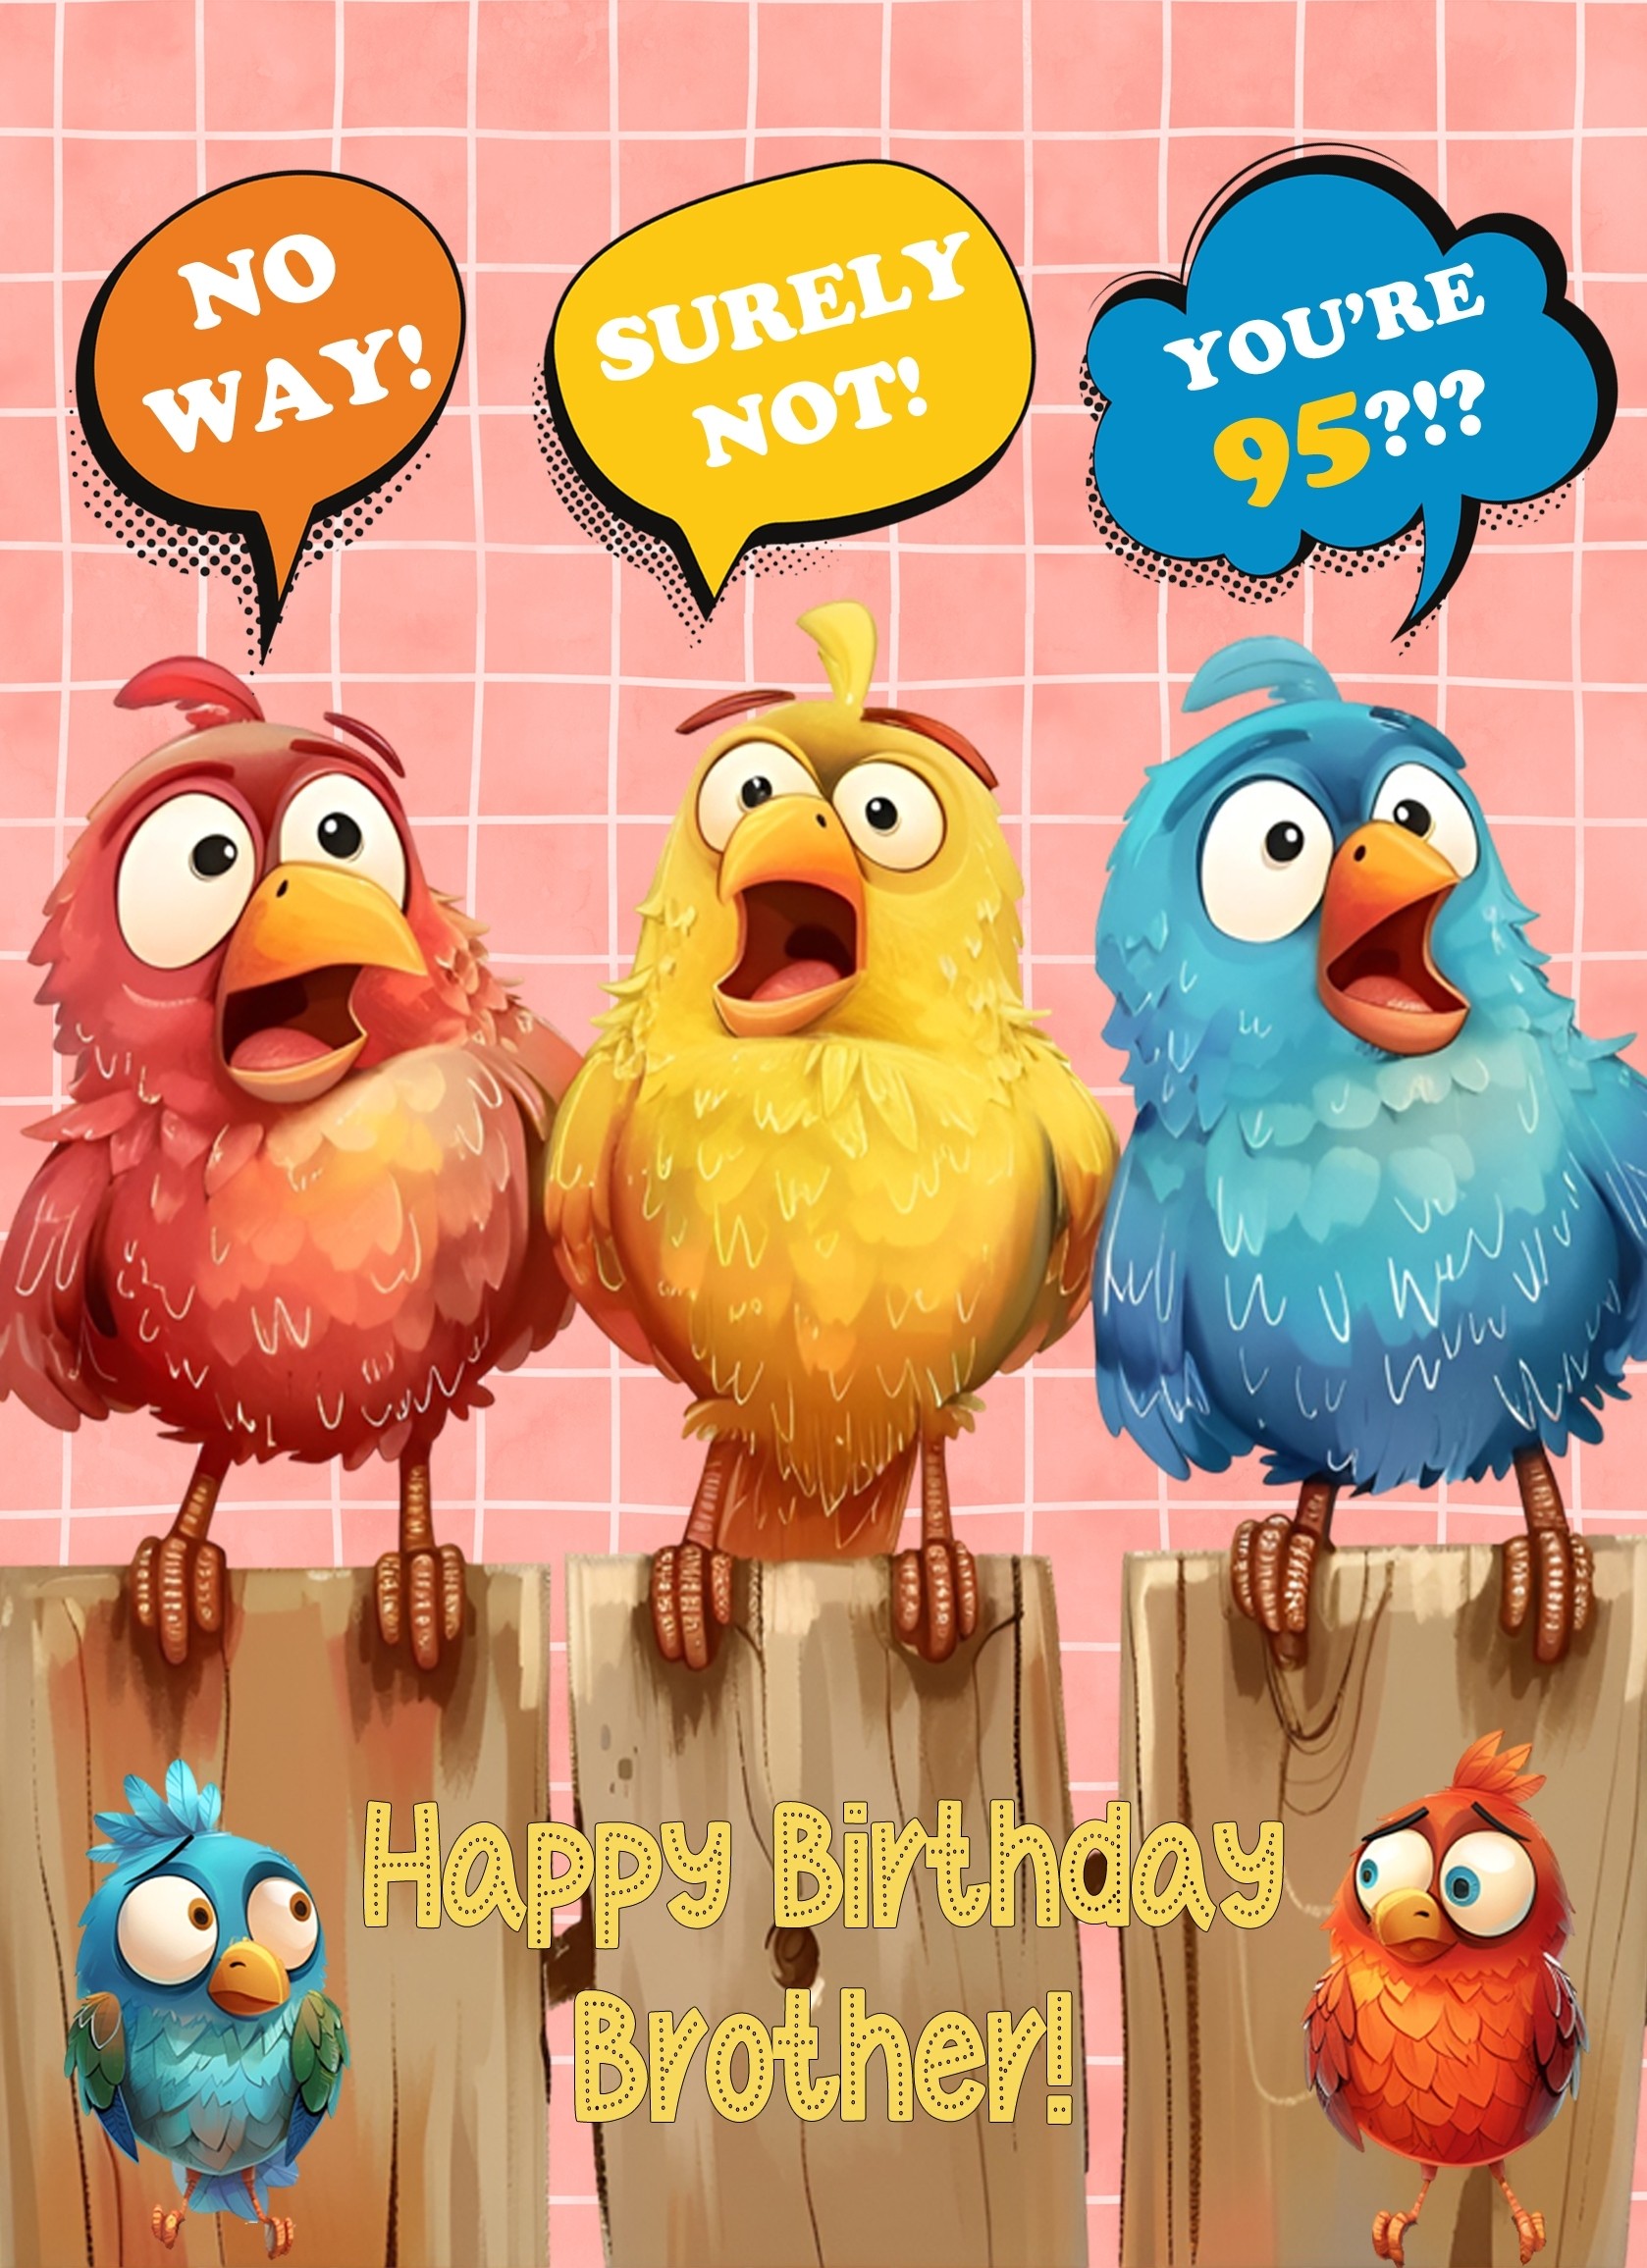 Brother 95th Birthday Card (Funny Birds Surprised)